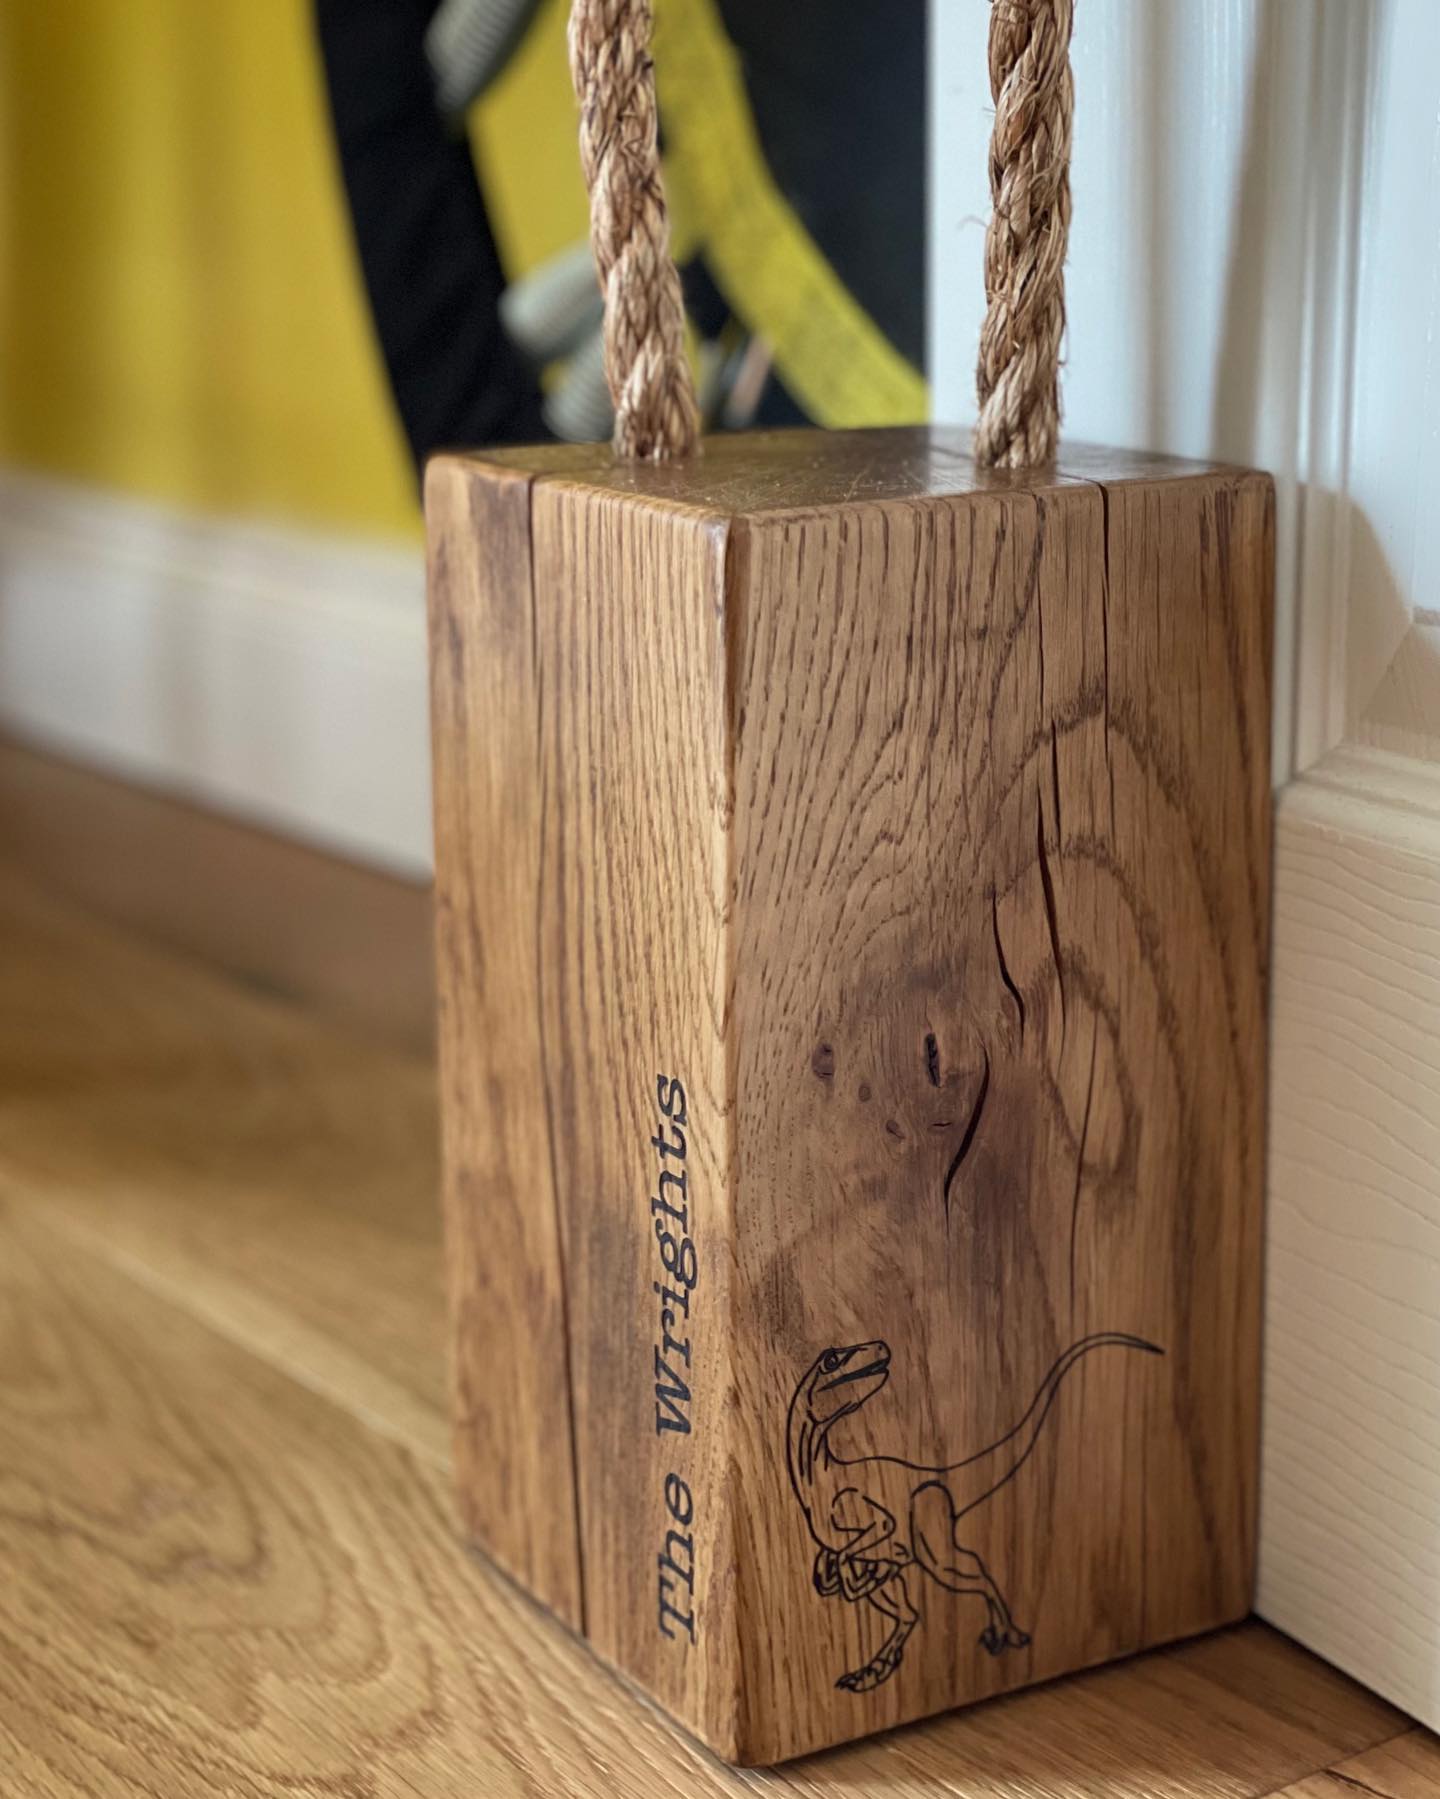 A lovely doorstop commission for my brother 🦖And a great snap of it in action!...#personalise #handcrafted #homedecor #lifestylephotography #home #doorstop #solidoak #raptor #family #gingerandtweed